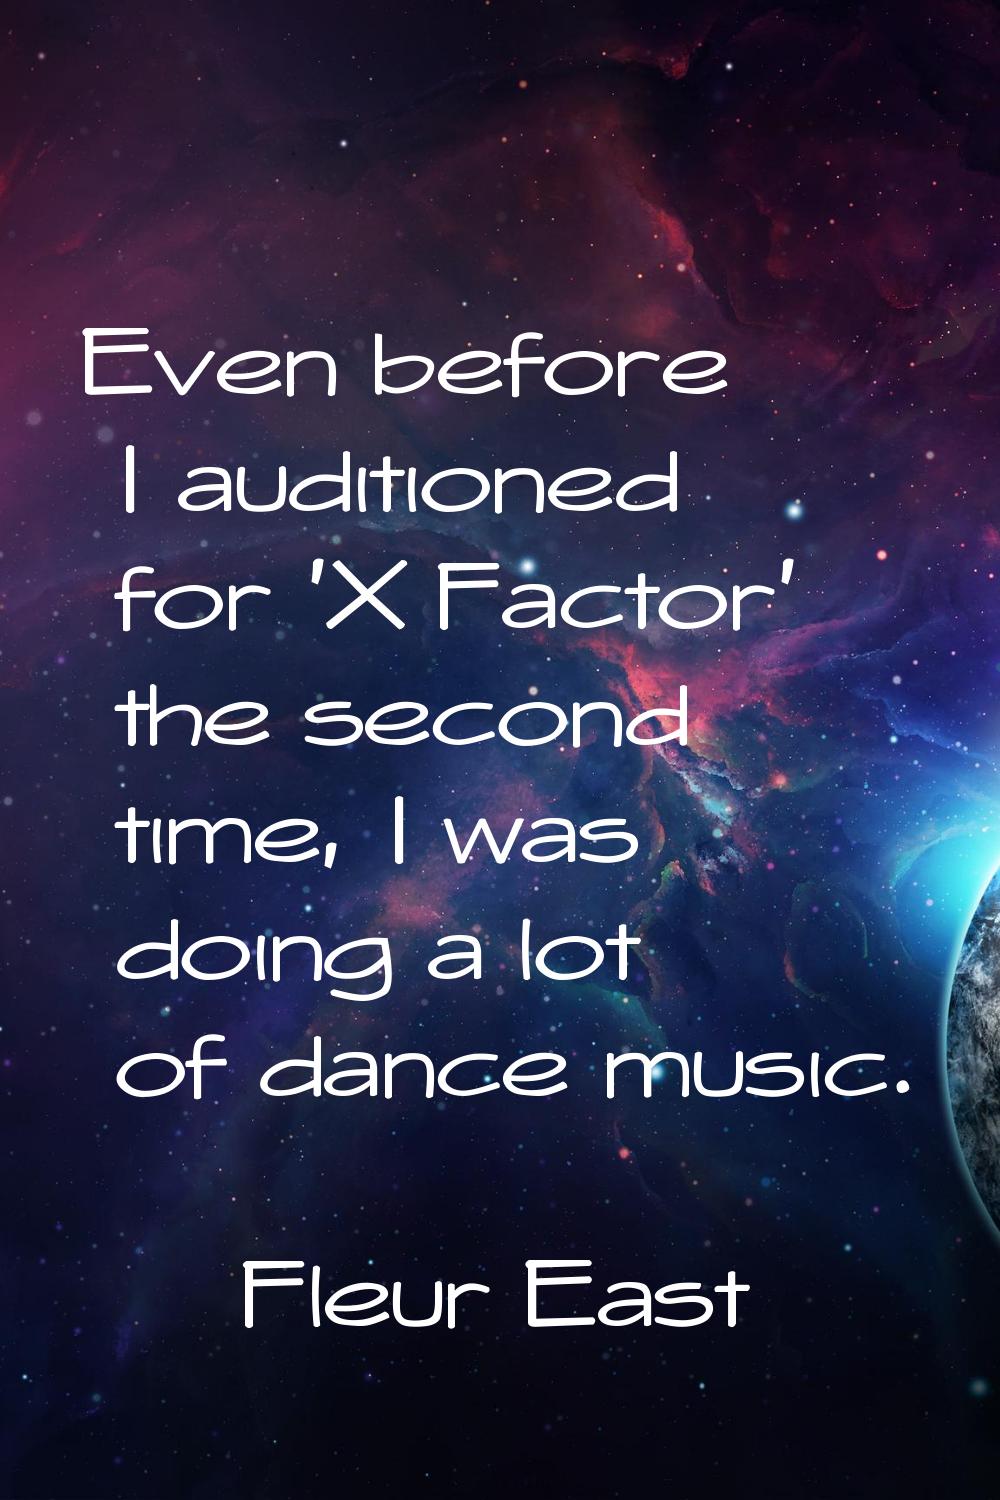 Even before I auditioned for 'X Factor' the second time, I was doing a lot of dance music.